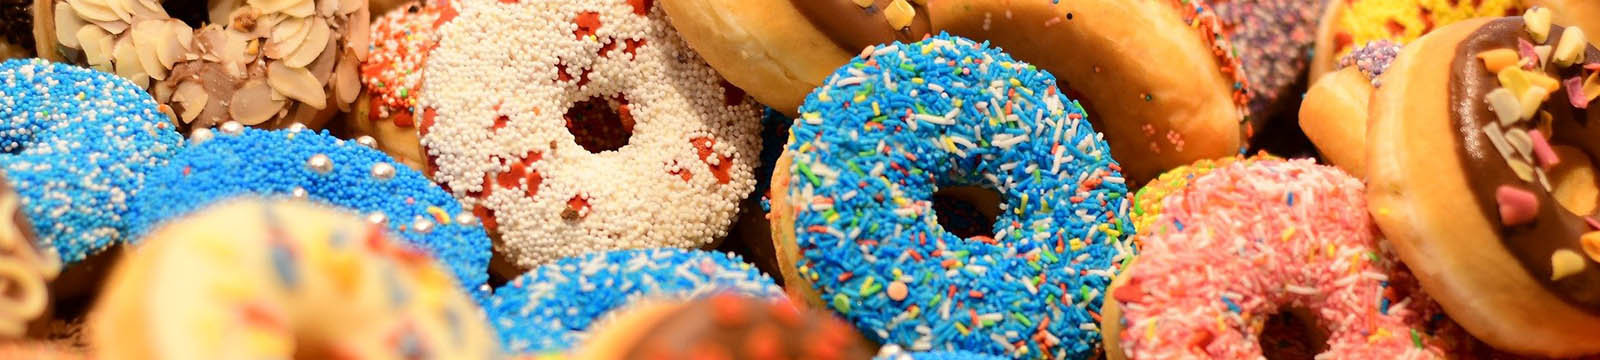 A pile of donuts covered in multi-colored frosting and sprinkles.